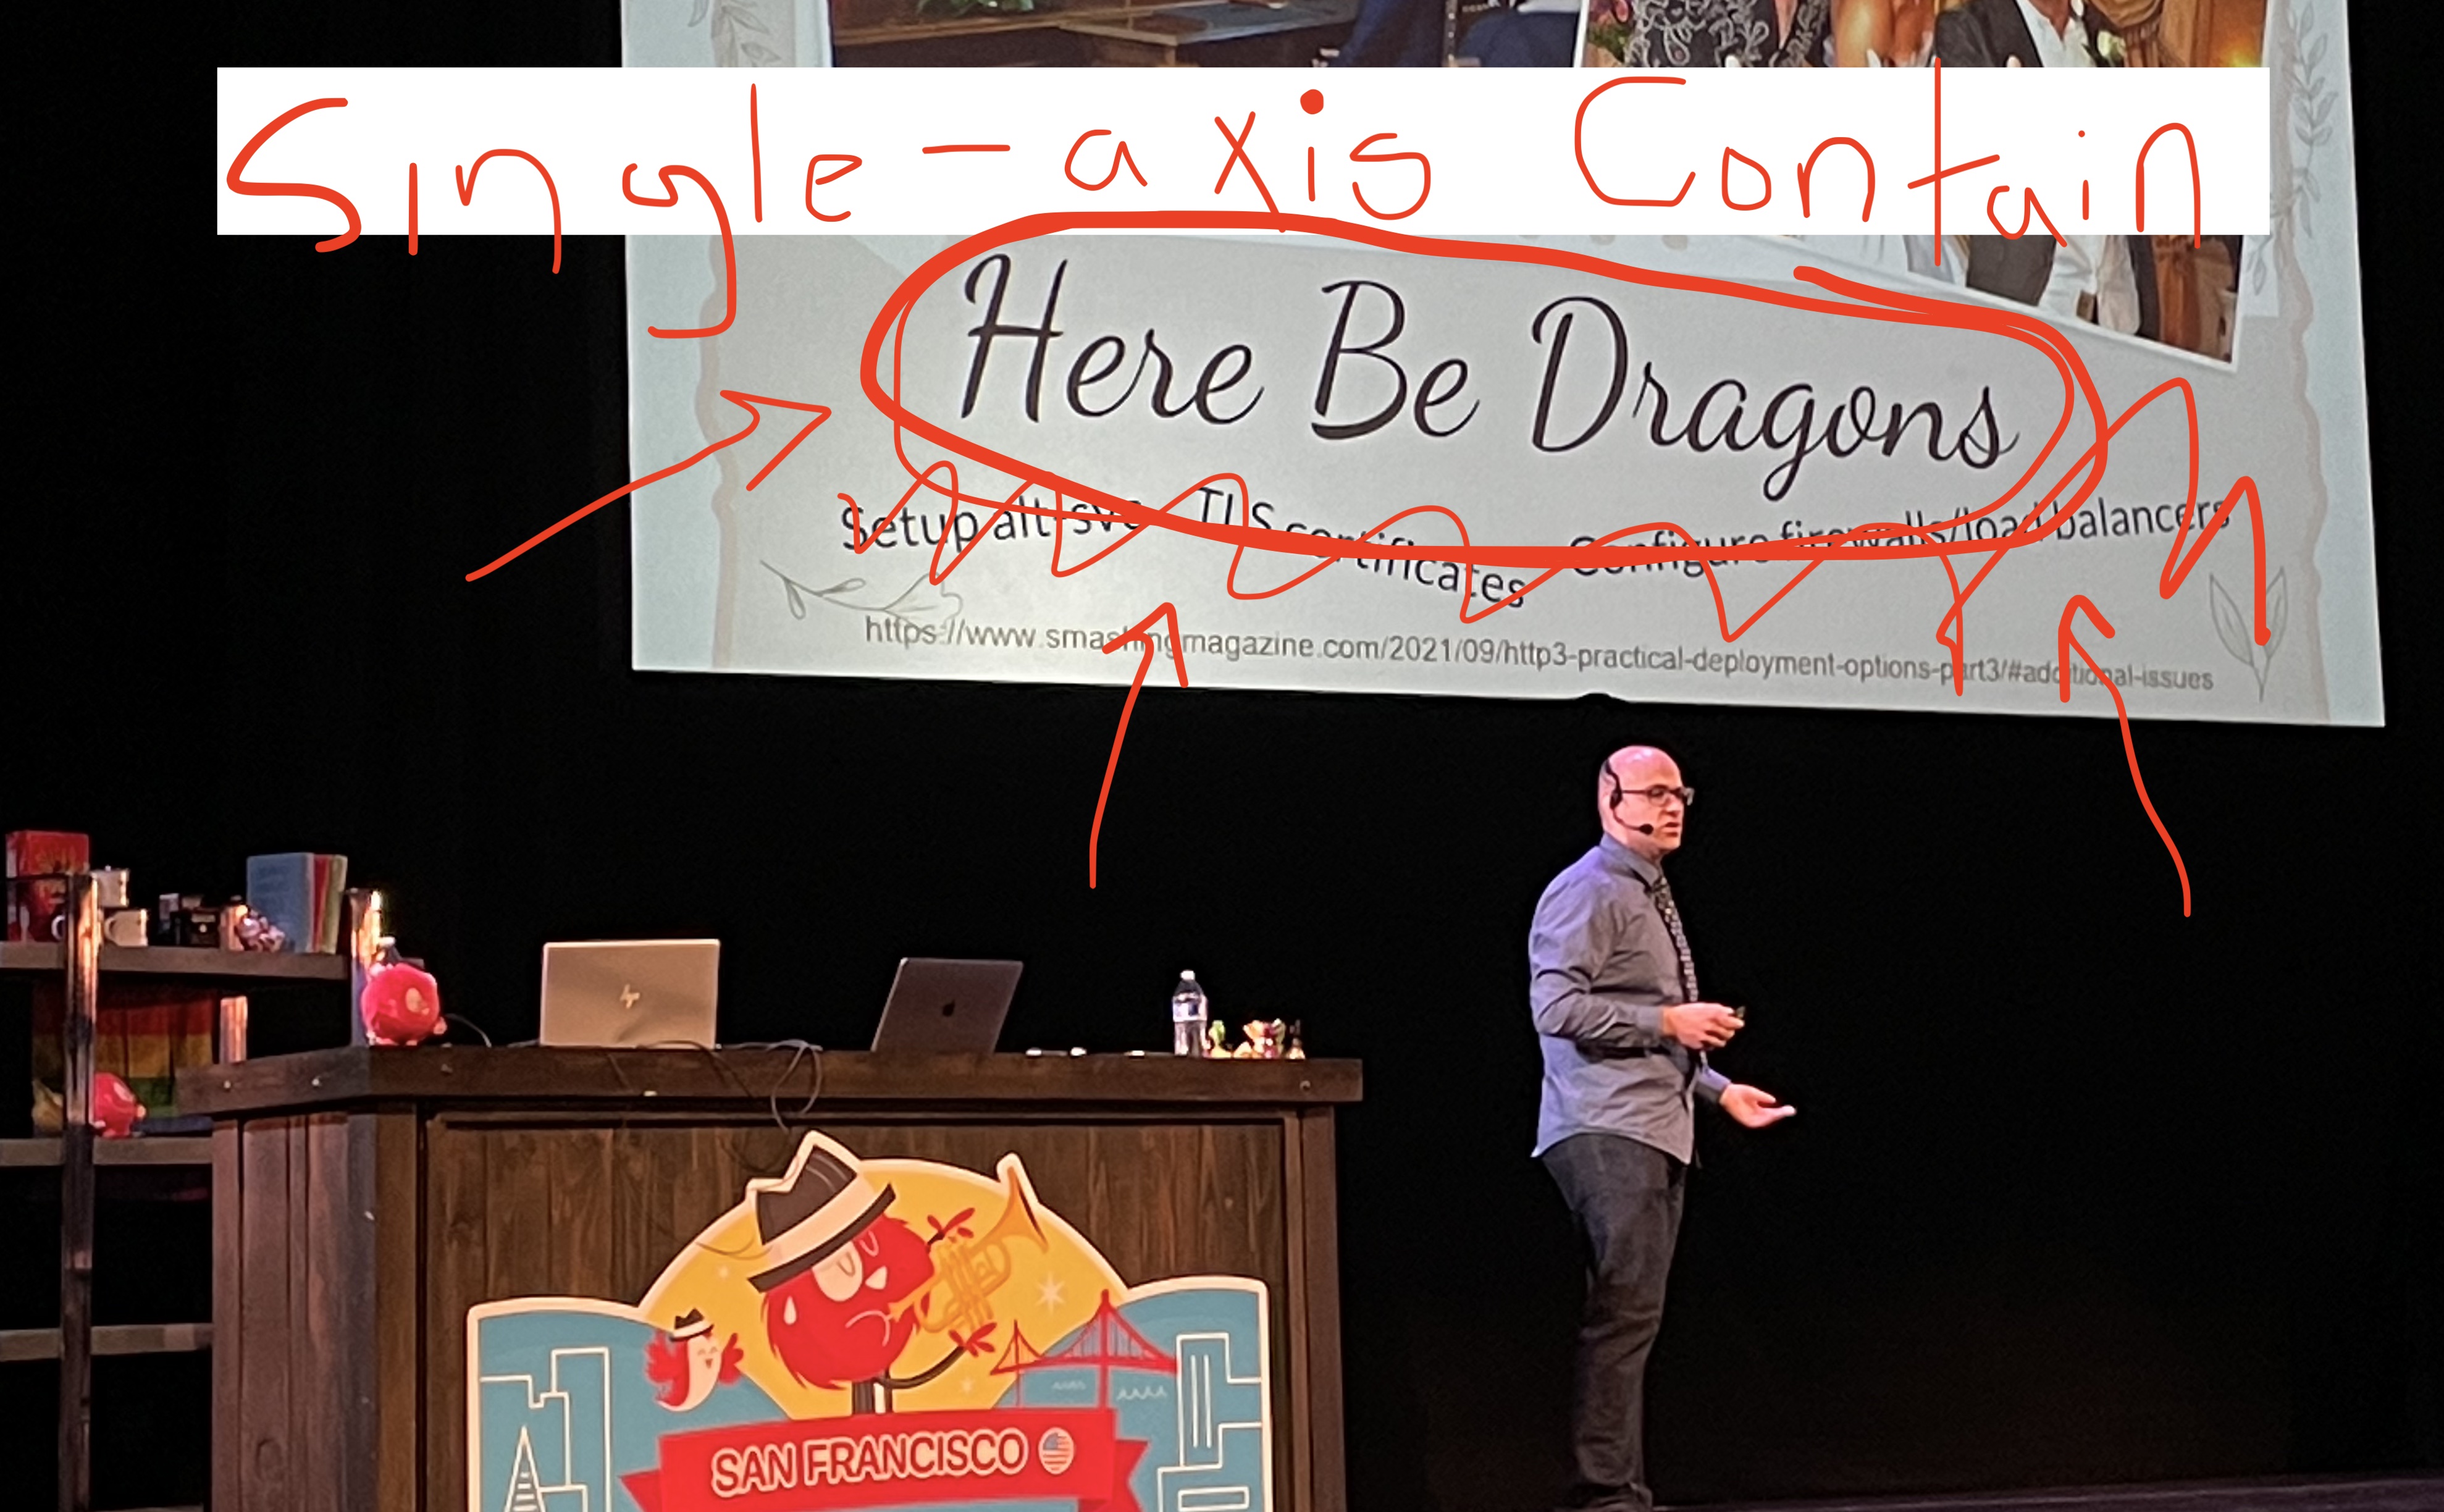 Robin Marx on stage,
with a slide that says
Here Be Dragons
about http3,
but scribbled text makes it about
Single-axis containment
